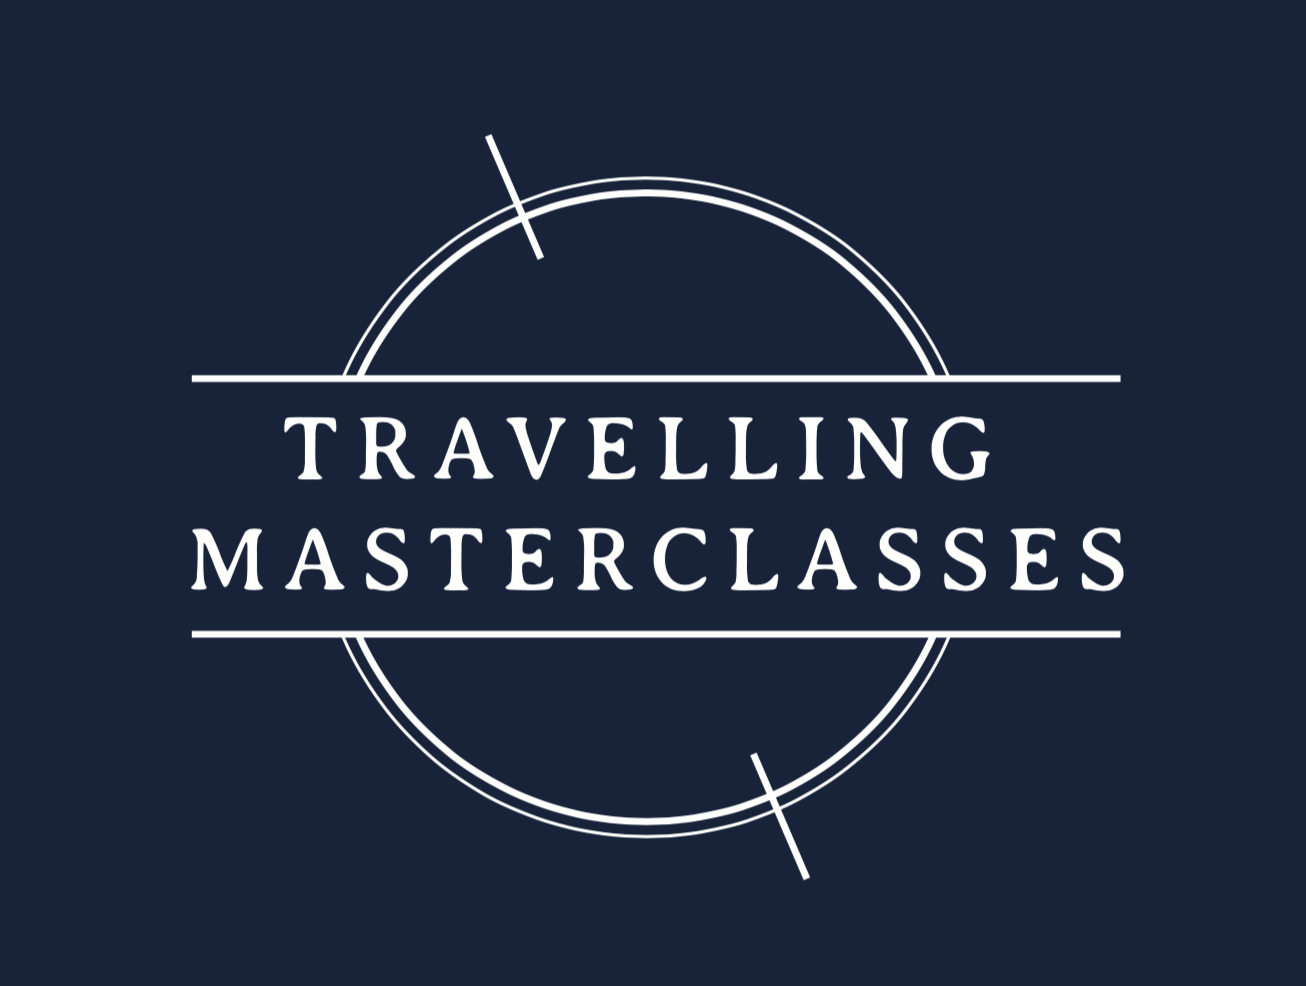 A Travelling Masterclass with Michael McCoy